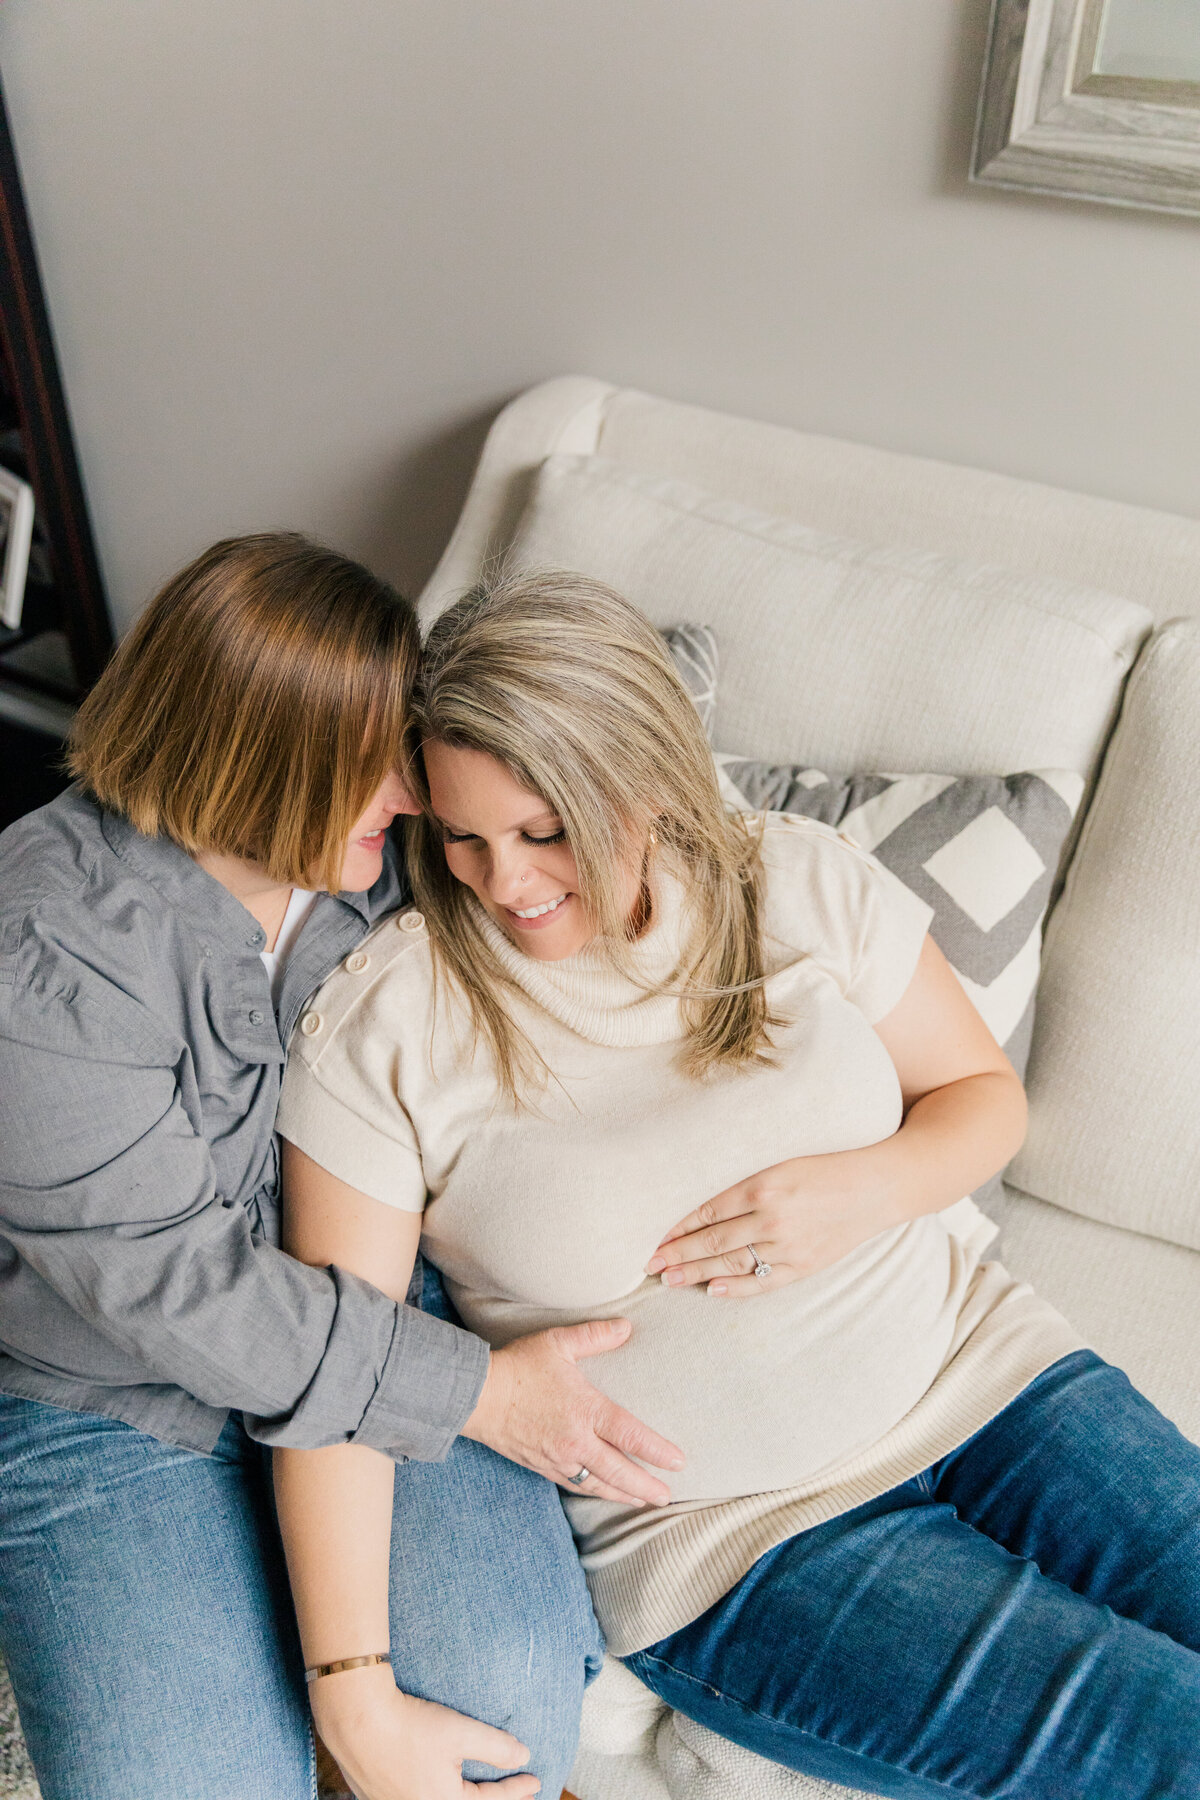 baltimore_maryland_family_lgbqt_friendly_maternity-21